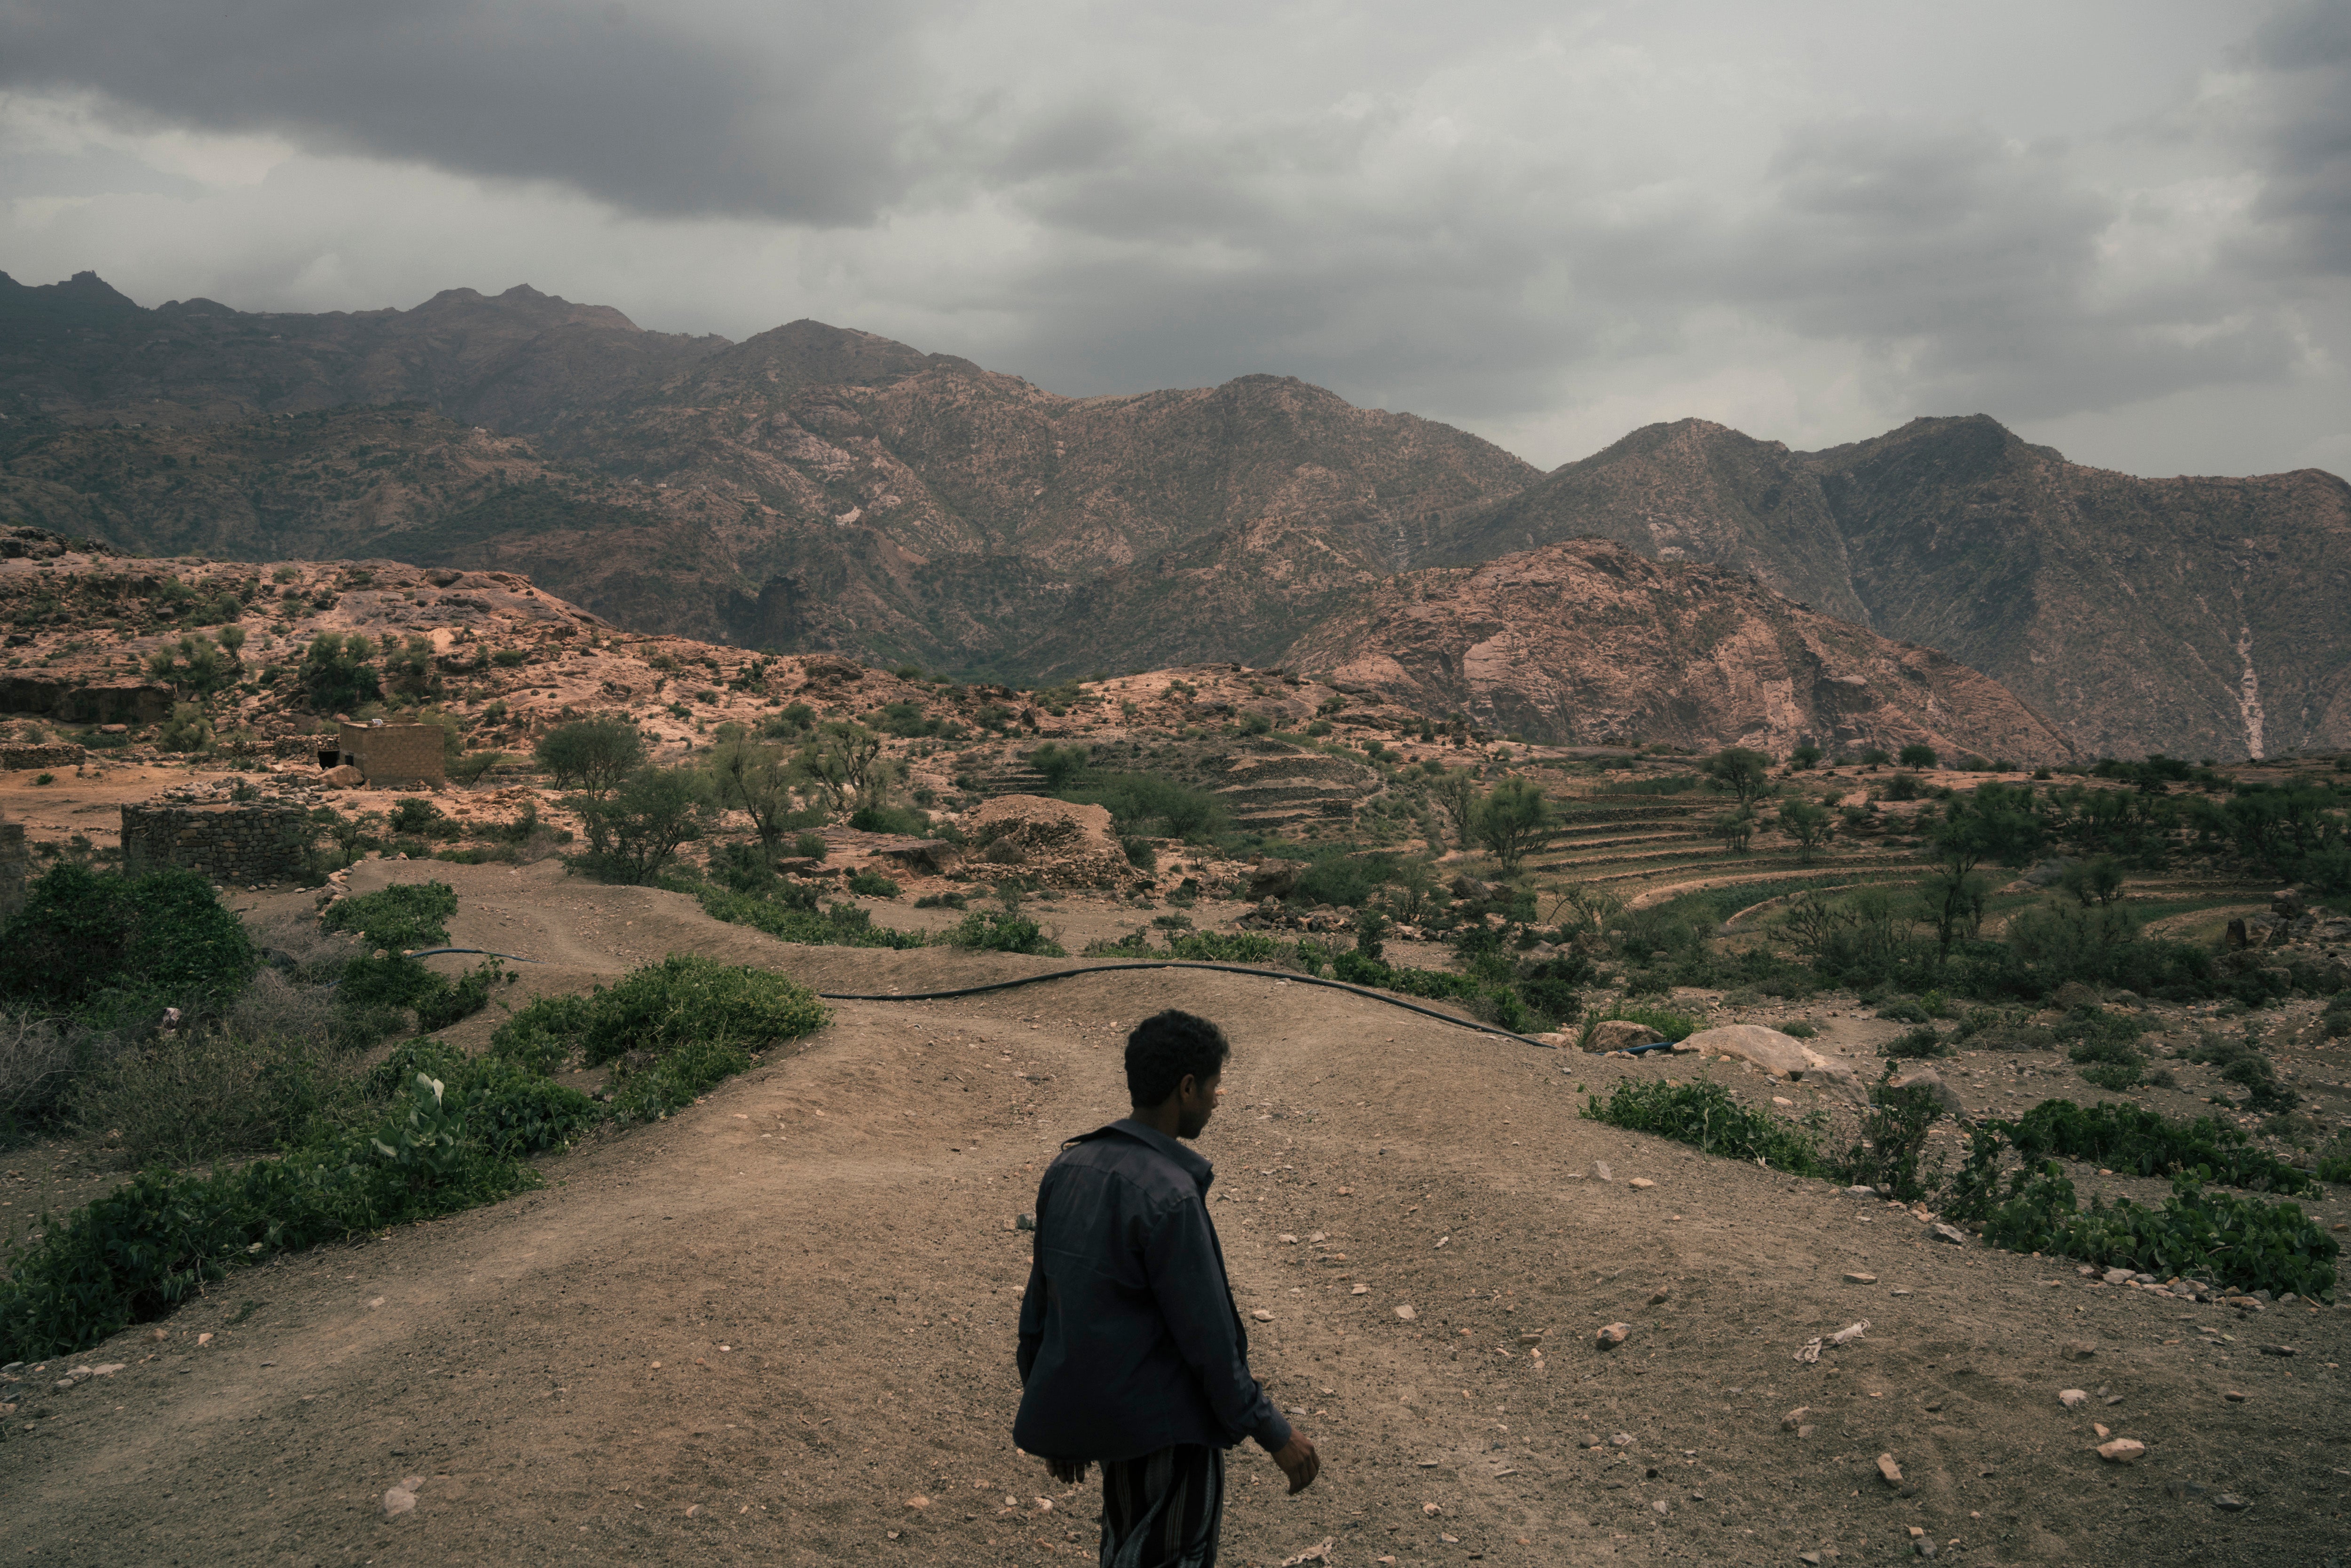 Mohammed Fulait Ahmed walks among the hills of his village, Moulis, in Yemen’s Maghrabah district